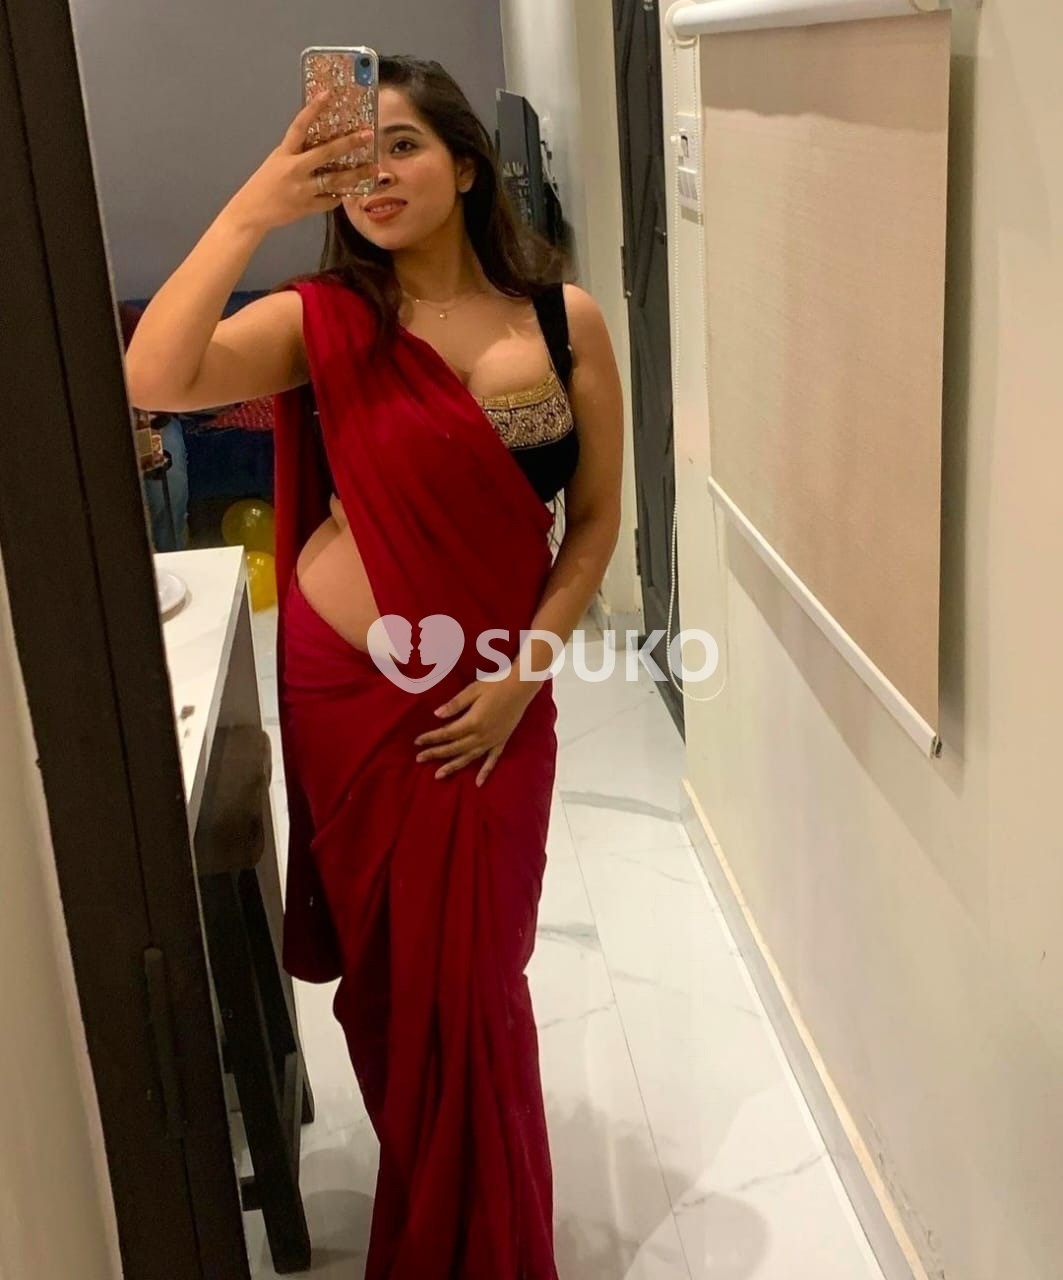 NAMPALLY ♥️(HYDERABAD)MYSELF SWETA CALL GIRL & BODY-2-BODY MASSAGE SPA SERVICES OUTCALL OUTCALL INCALL 24 HOURS...